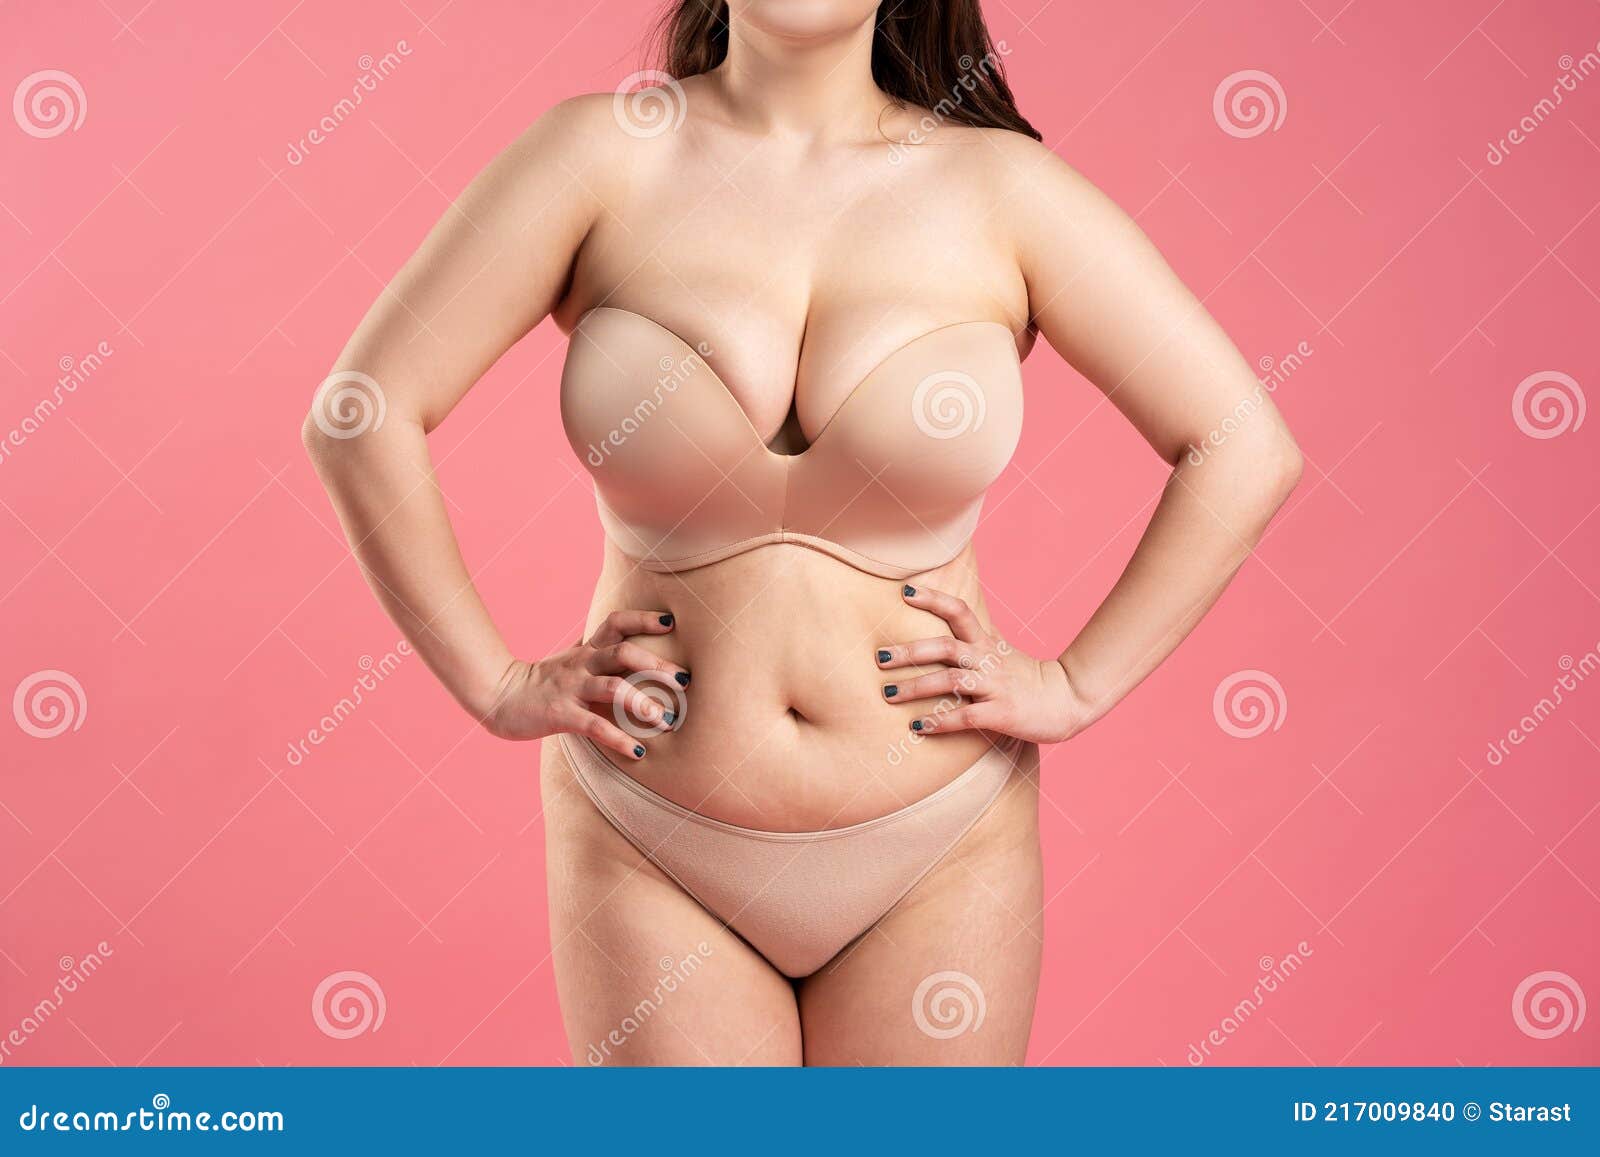 Fat Woman with Large Breasts in a Push-up Bra on Pink Background,  Overweight Female Body Stock Image - Image of flabby, fashion: 240765399